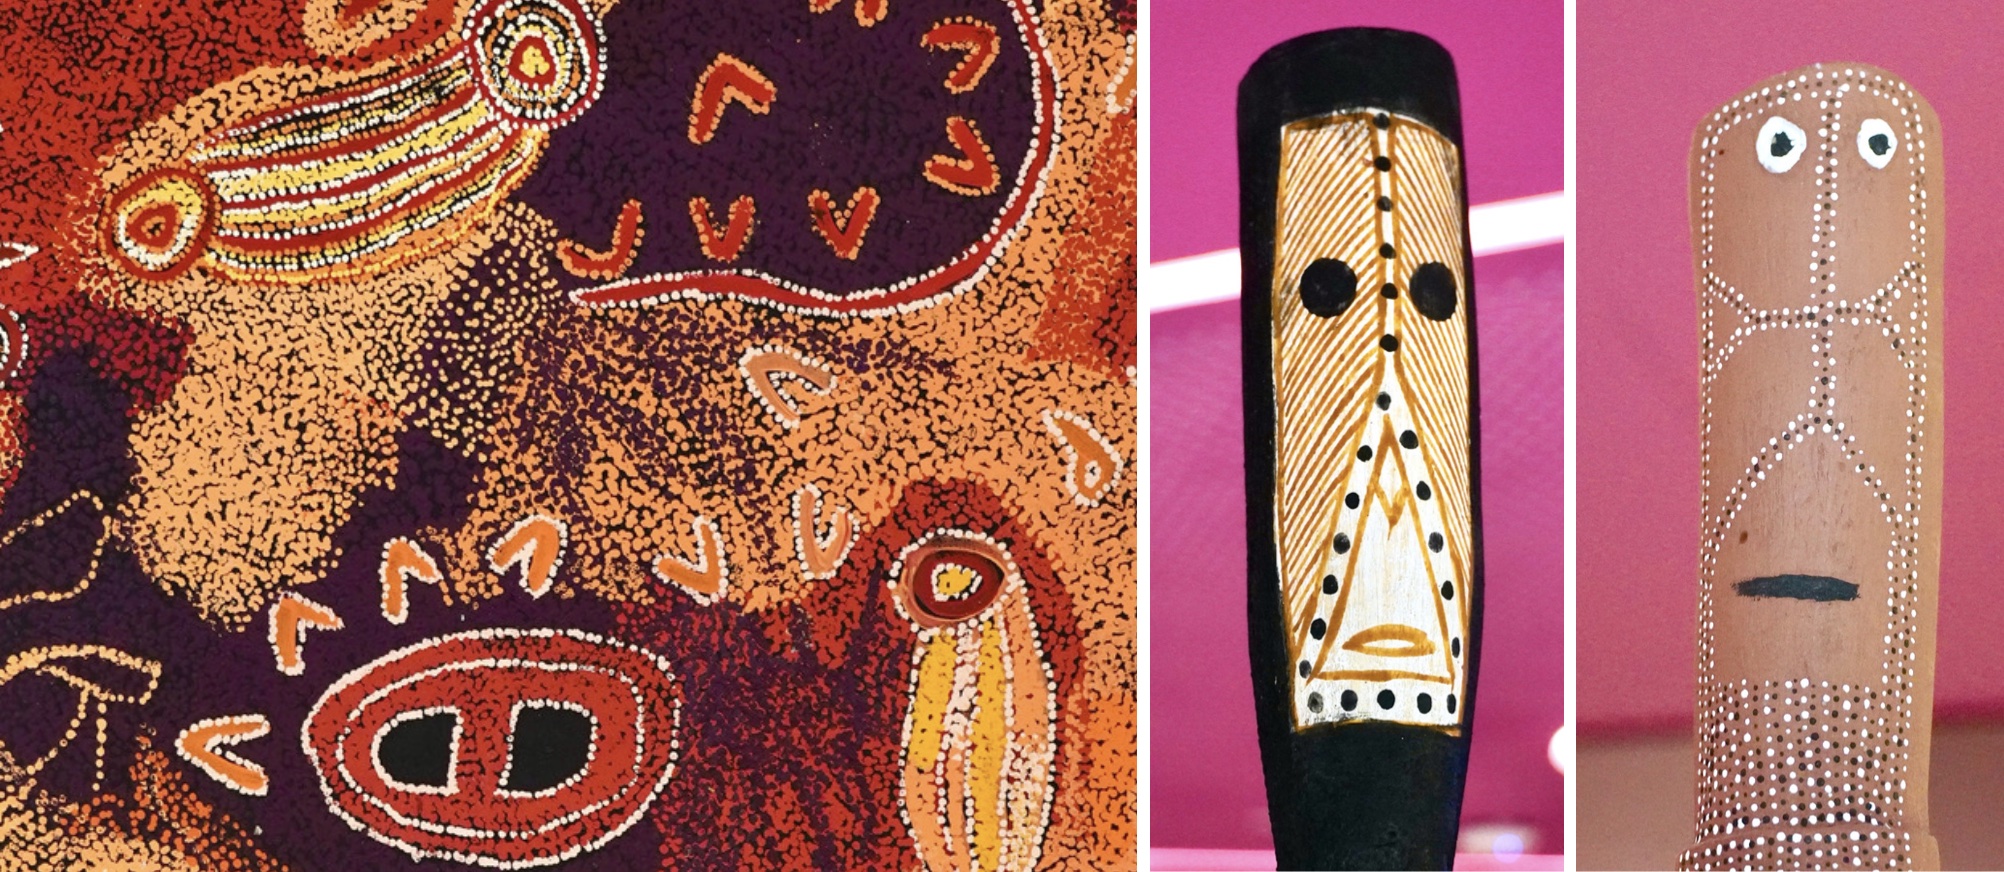 New art unveiled for NAIDOC Week